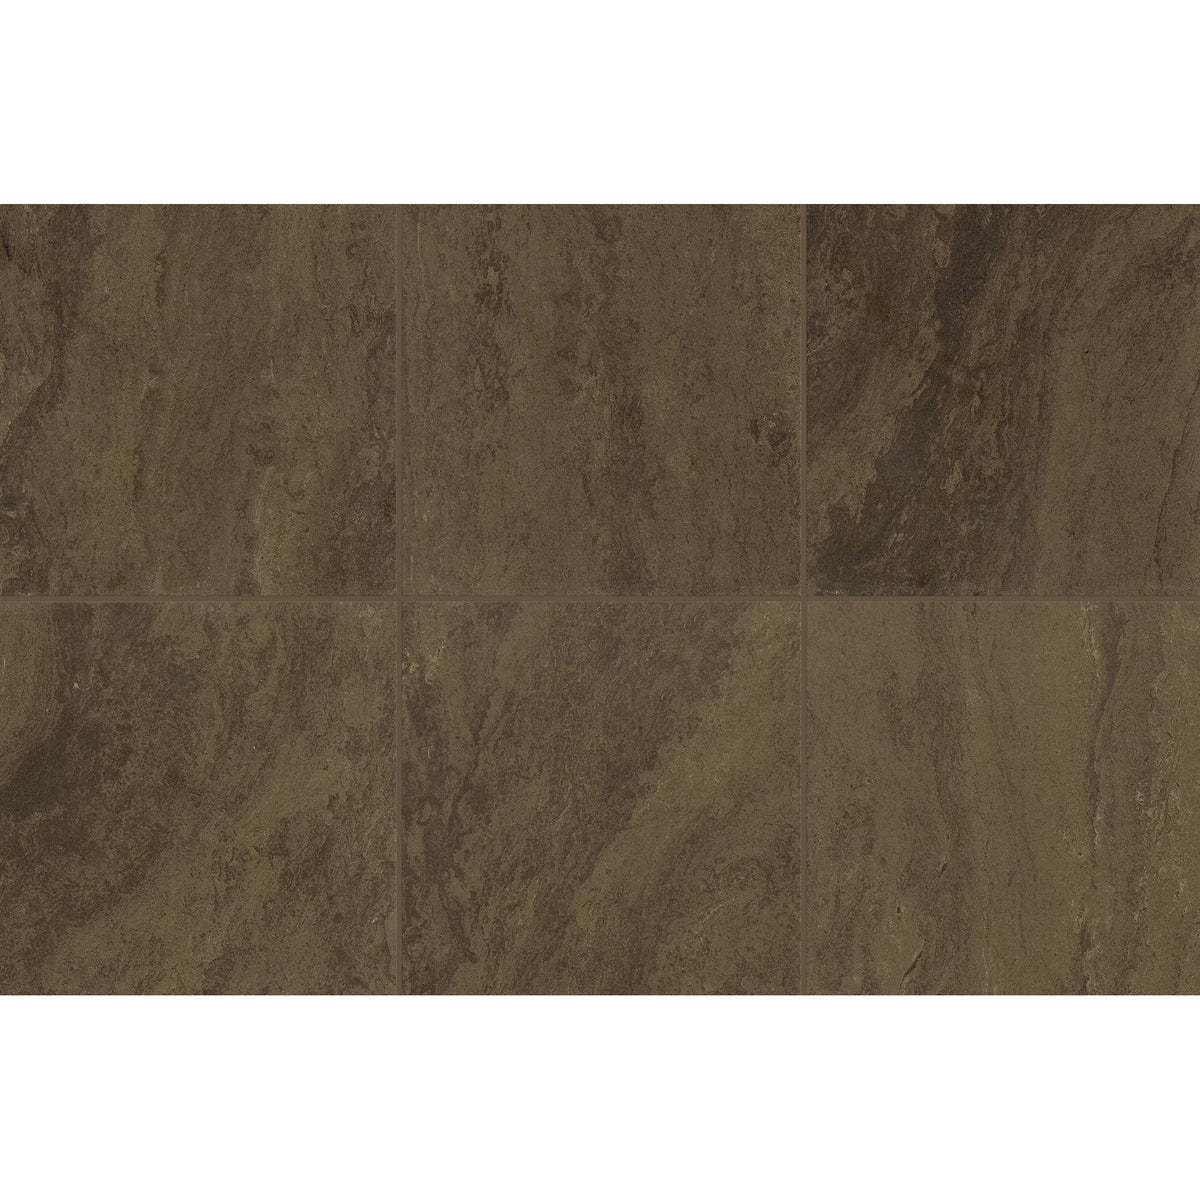 Marazzi - Classentino Marble 24 in. x 24 in. Porcelain Tile - Imperial Brown Matte